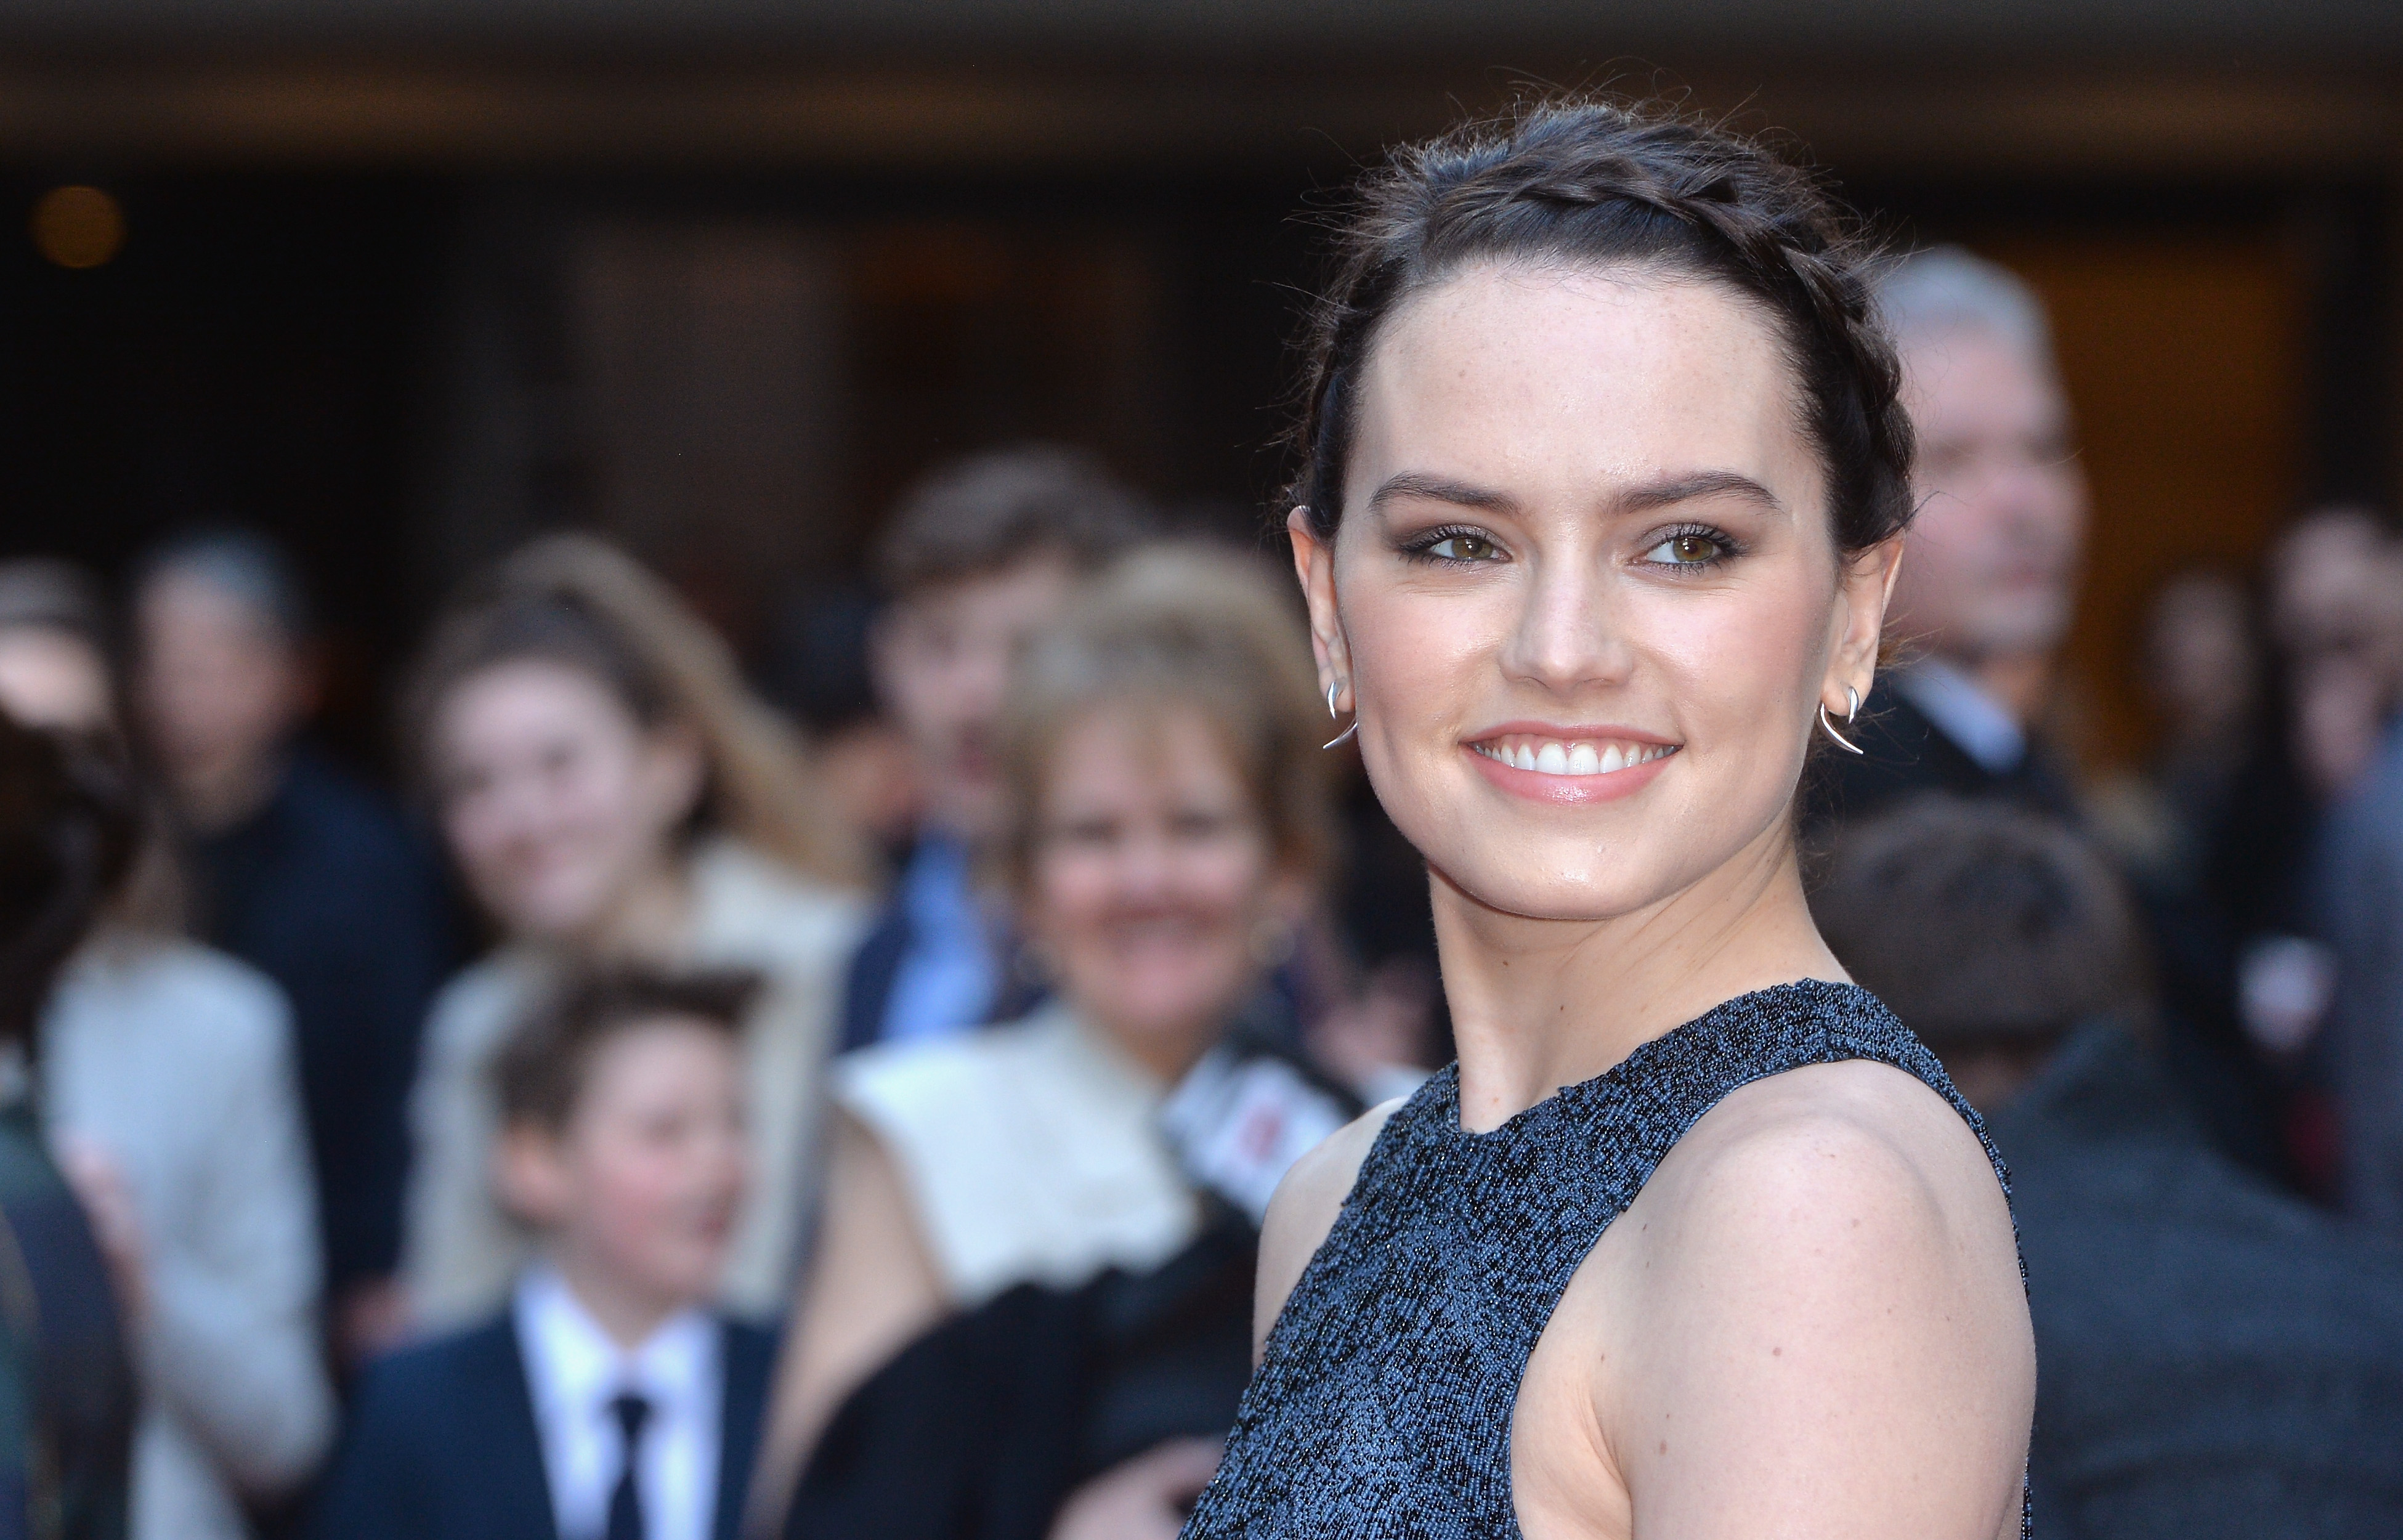 Daisy Ridley 2020 Actress Wallpapers